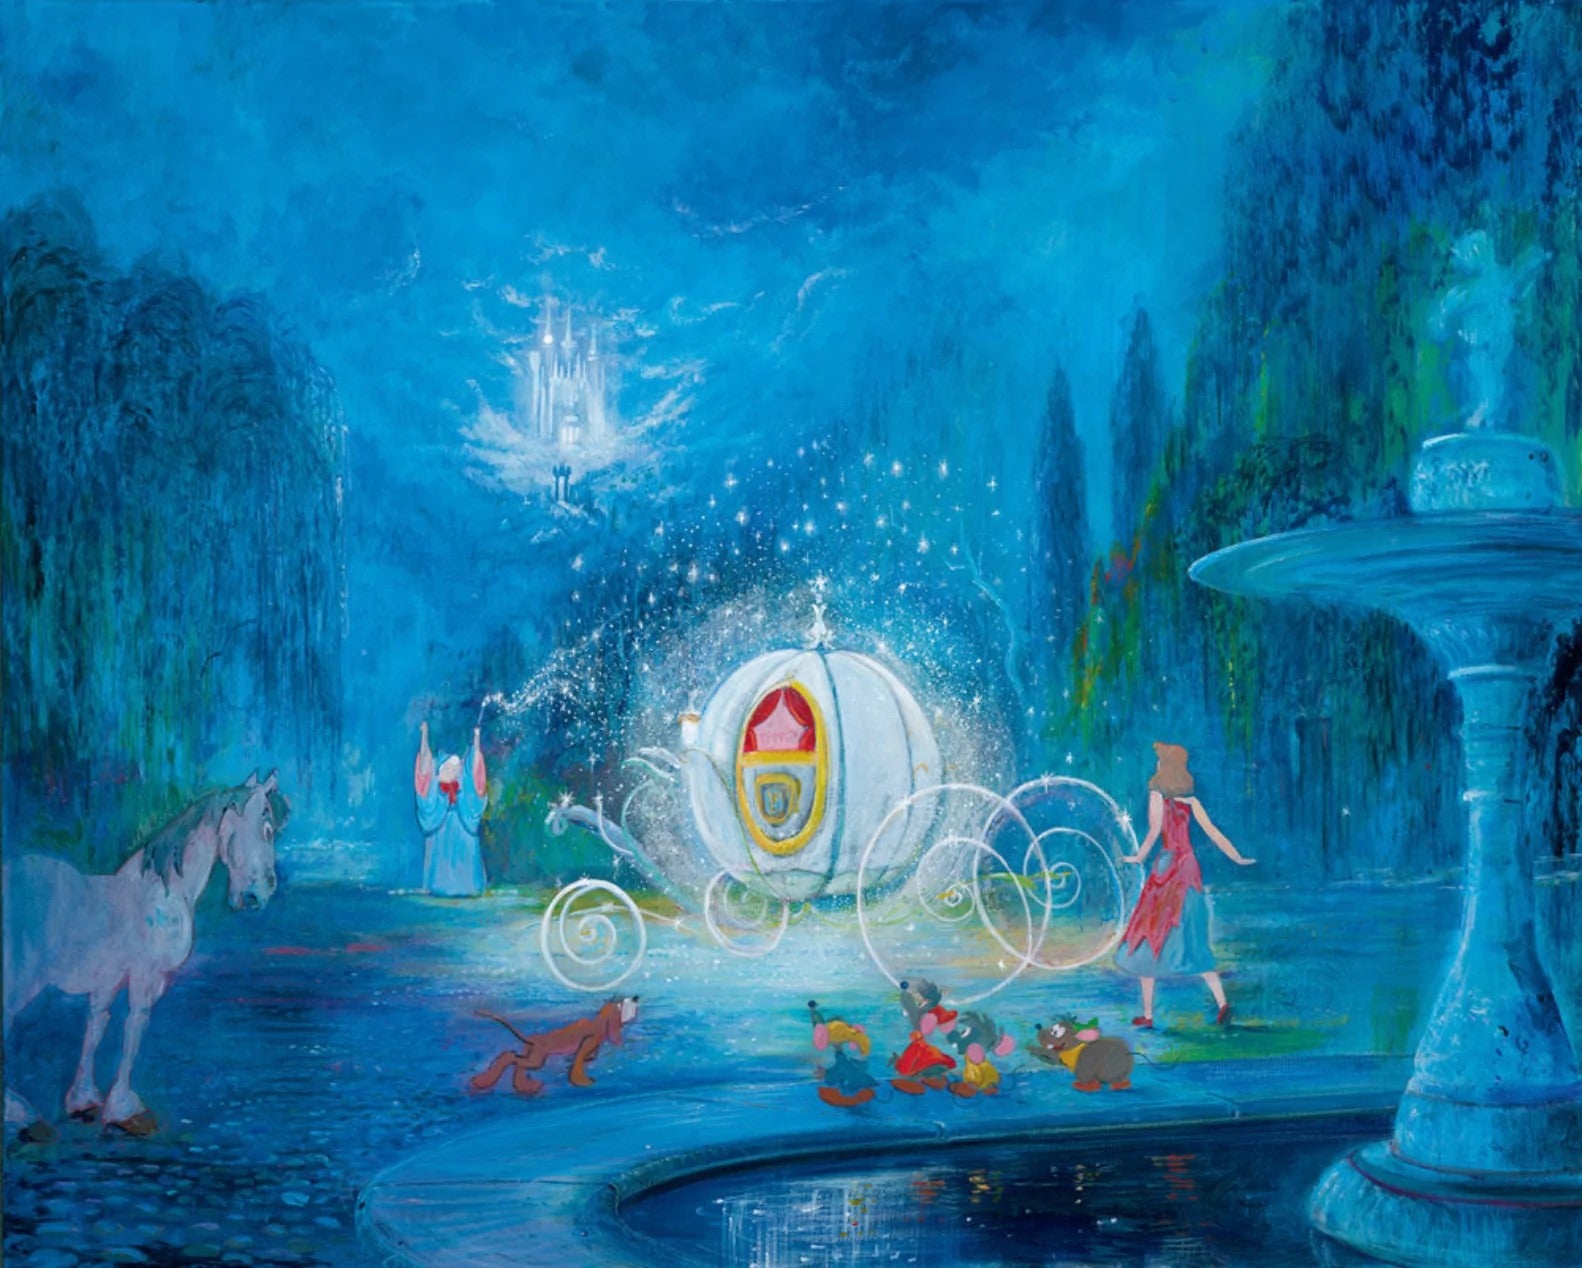 A Dream Is A Wish Your Heart Makes by Harrison Ellenshaw inspired by Cinderella